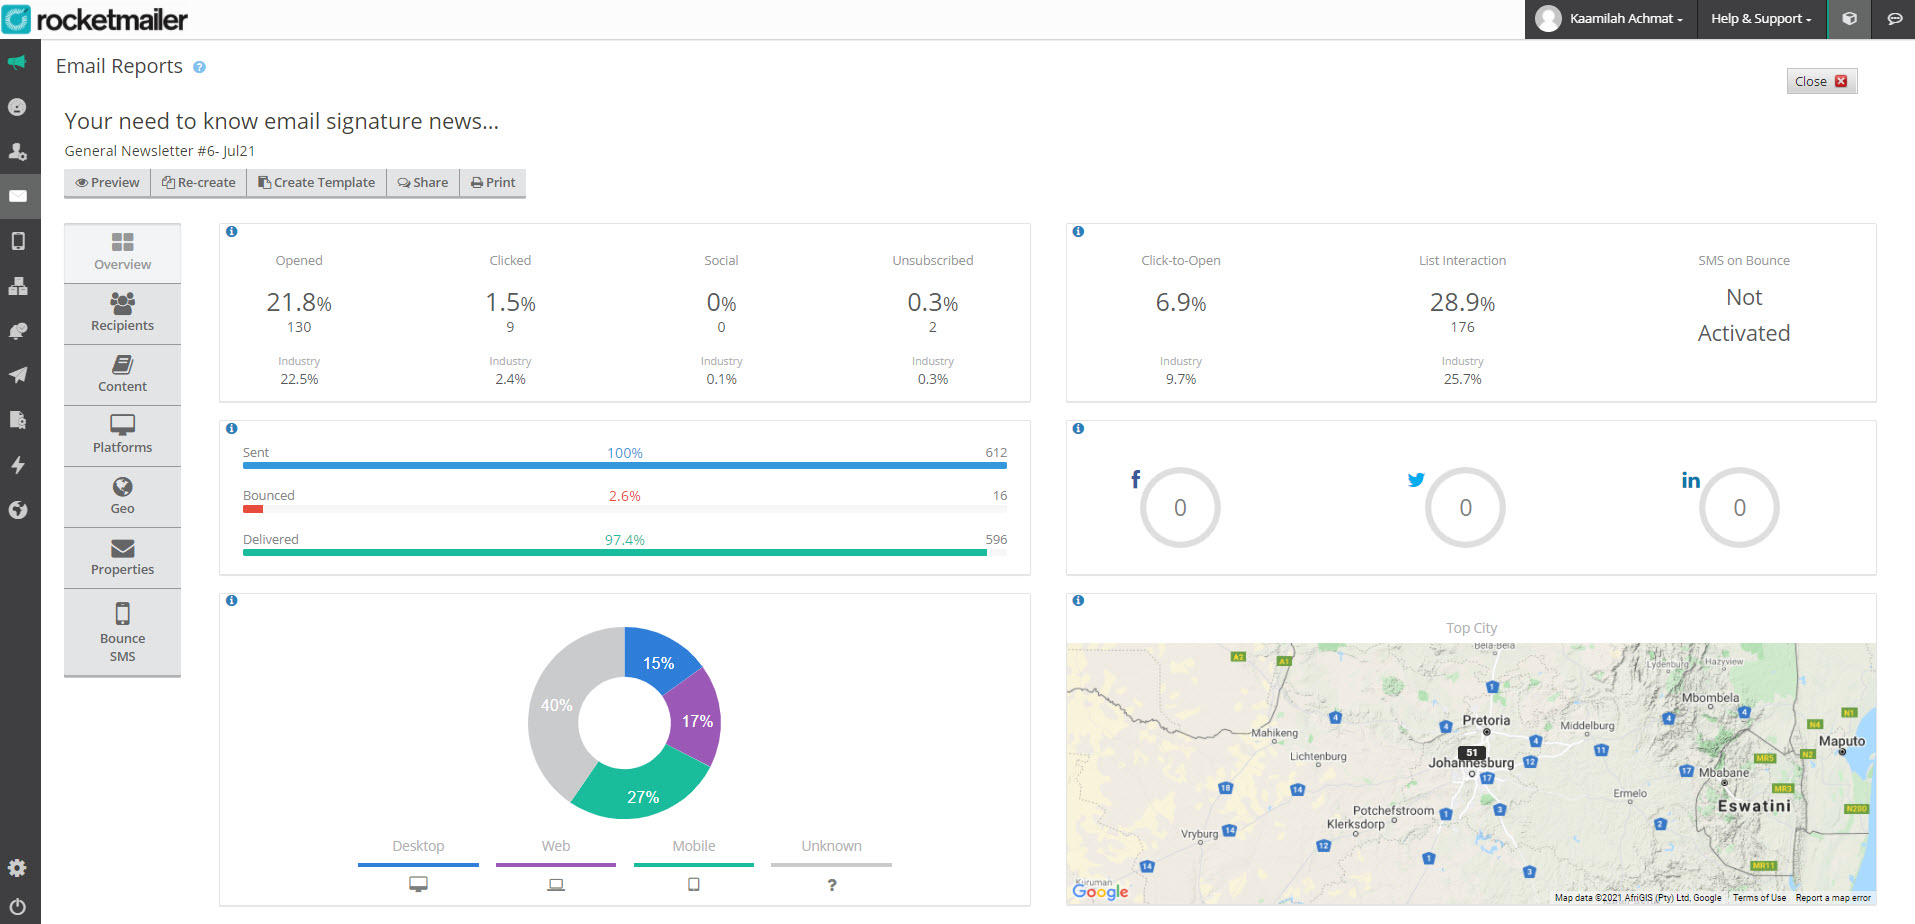 Real-time tracking, advanced analytics and in-depth reporting